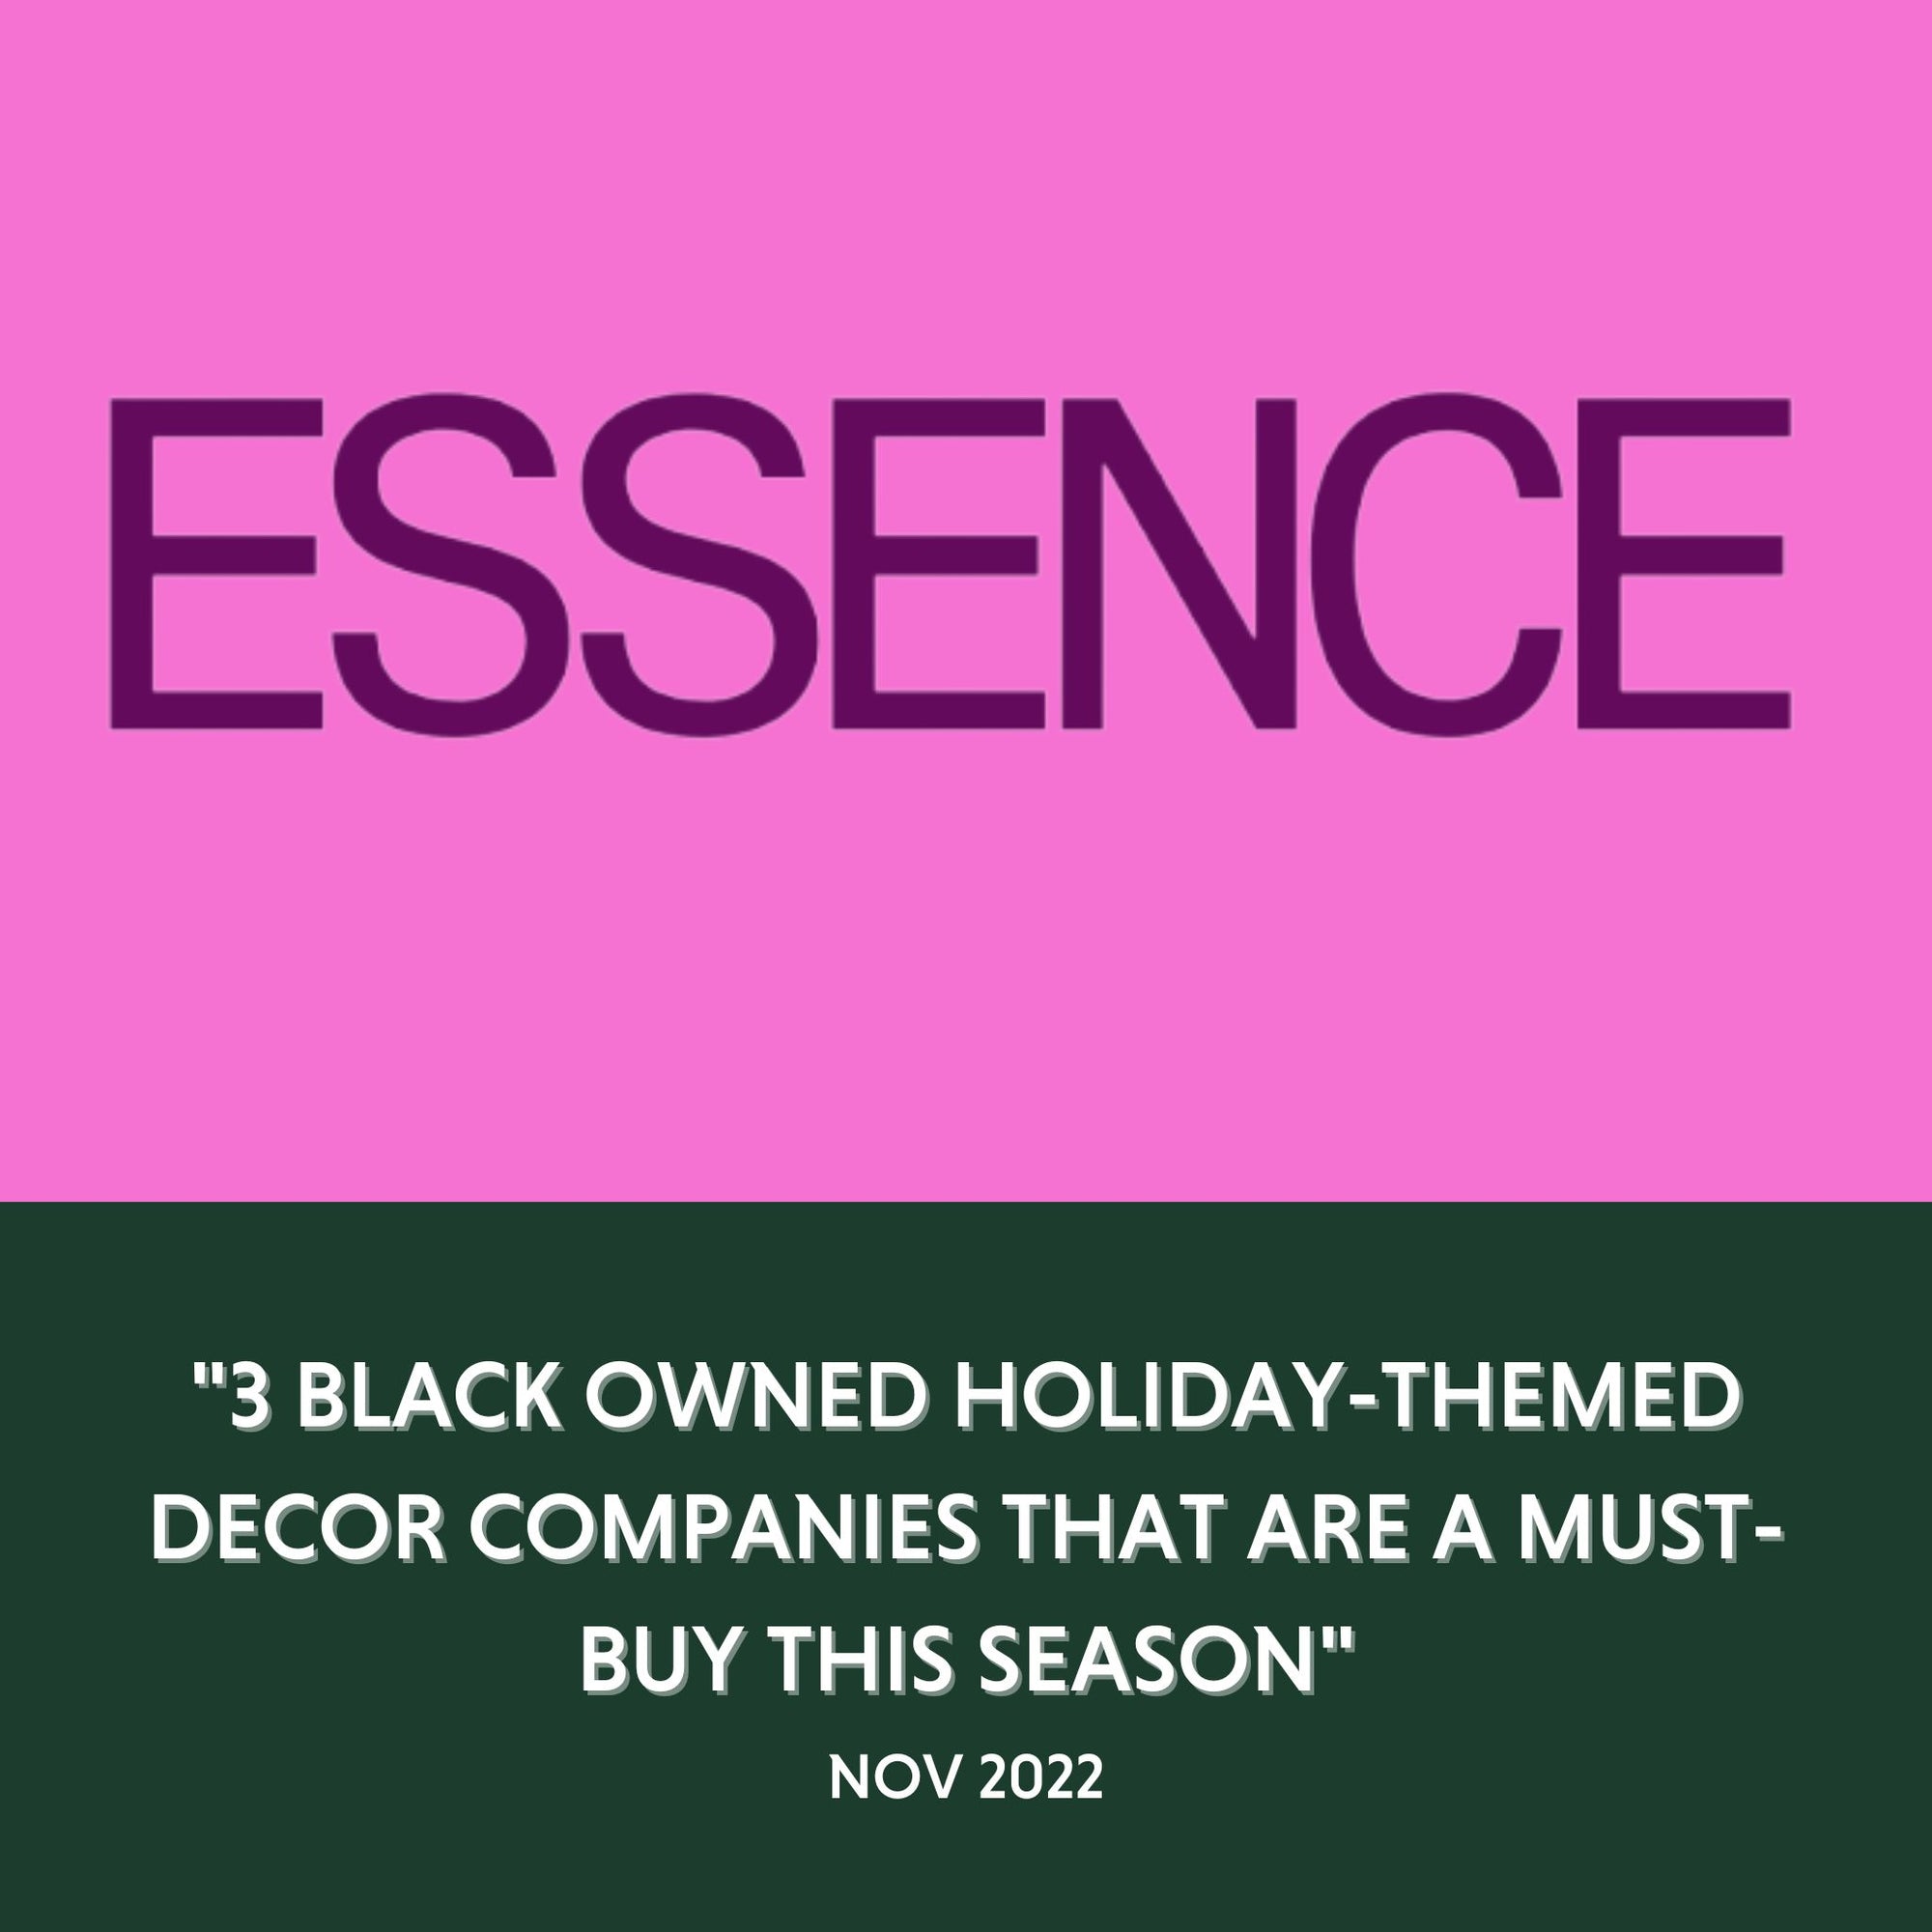 Essence - "3 Black Owned Holiday-Themed Decor Companies That Are A Must-Buy This Season" 